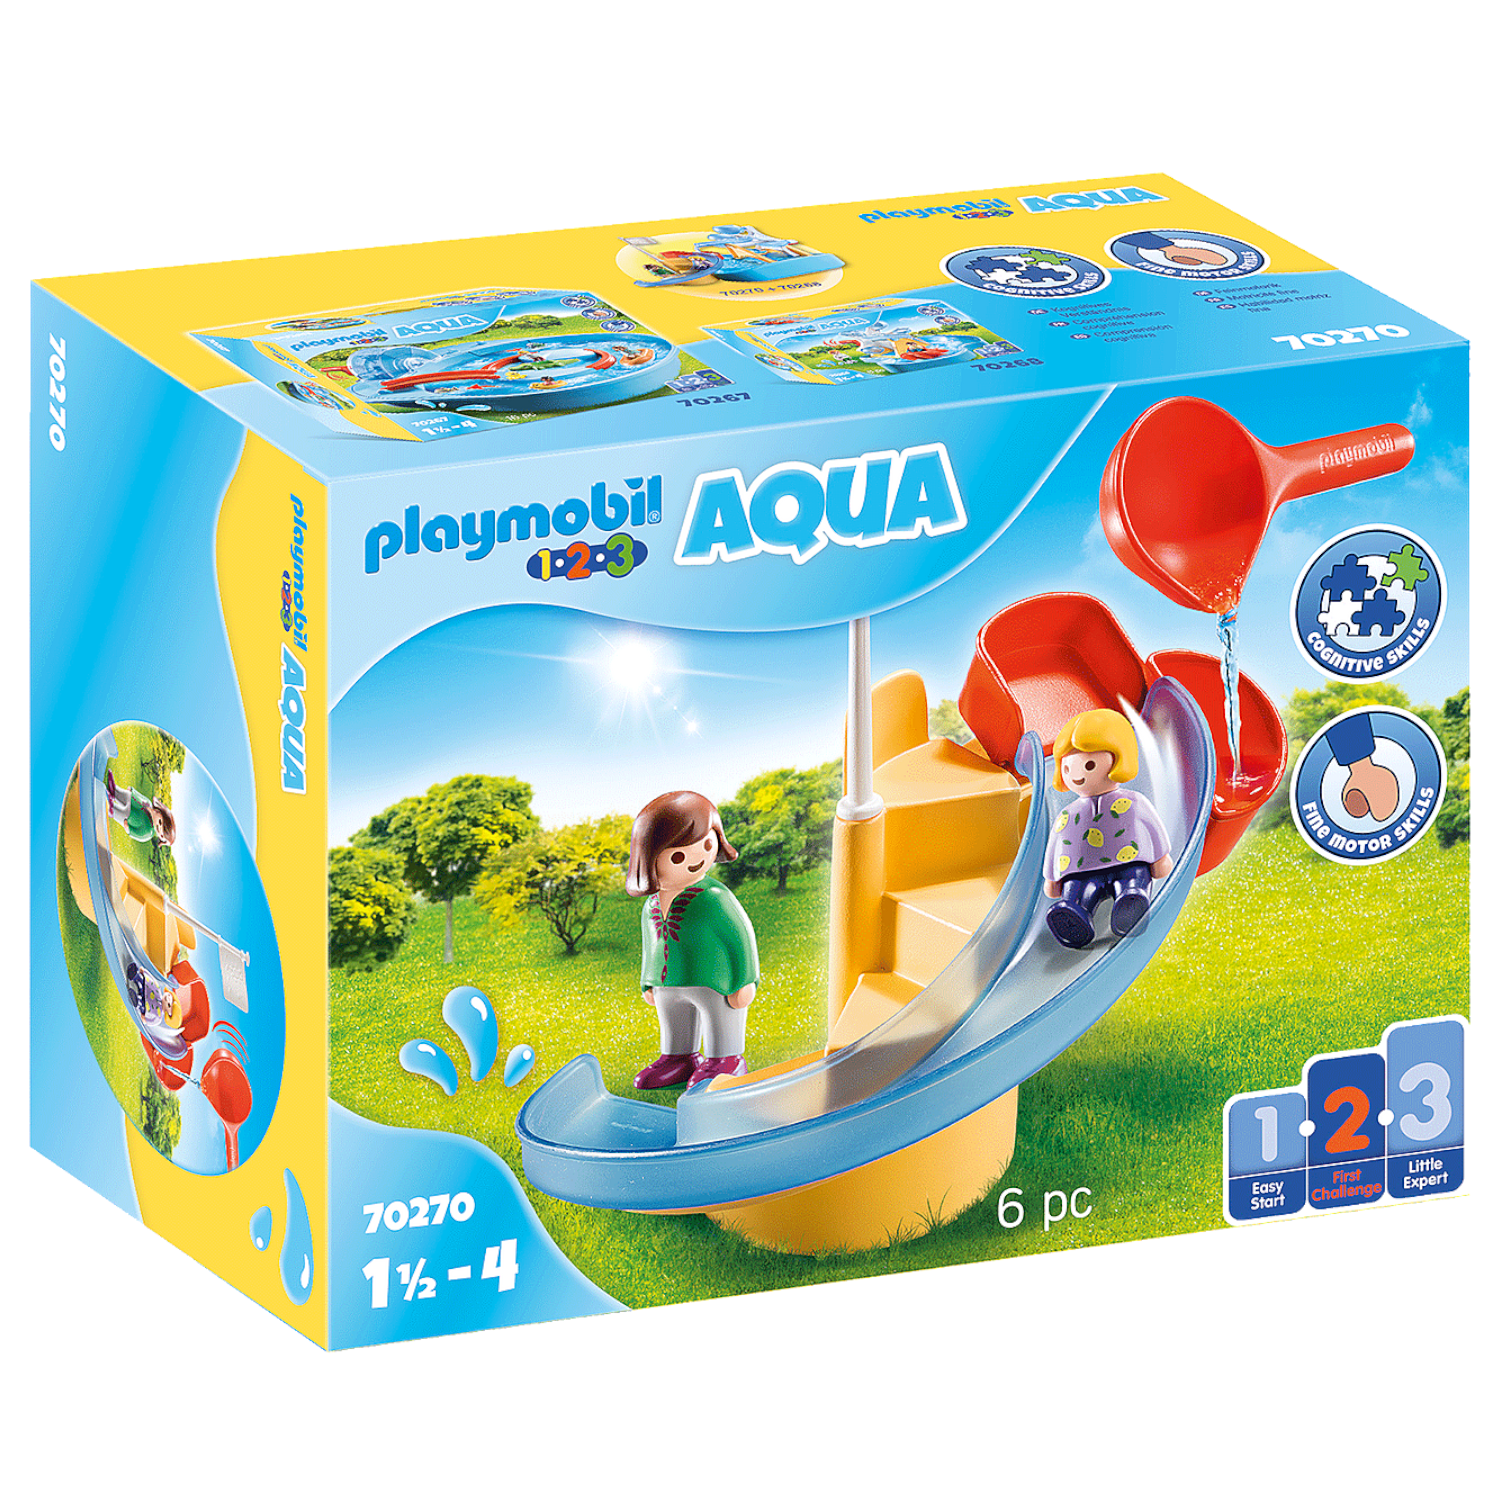 Playmobil City Life Pool Party with Slide - 70987